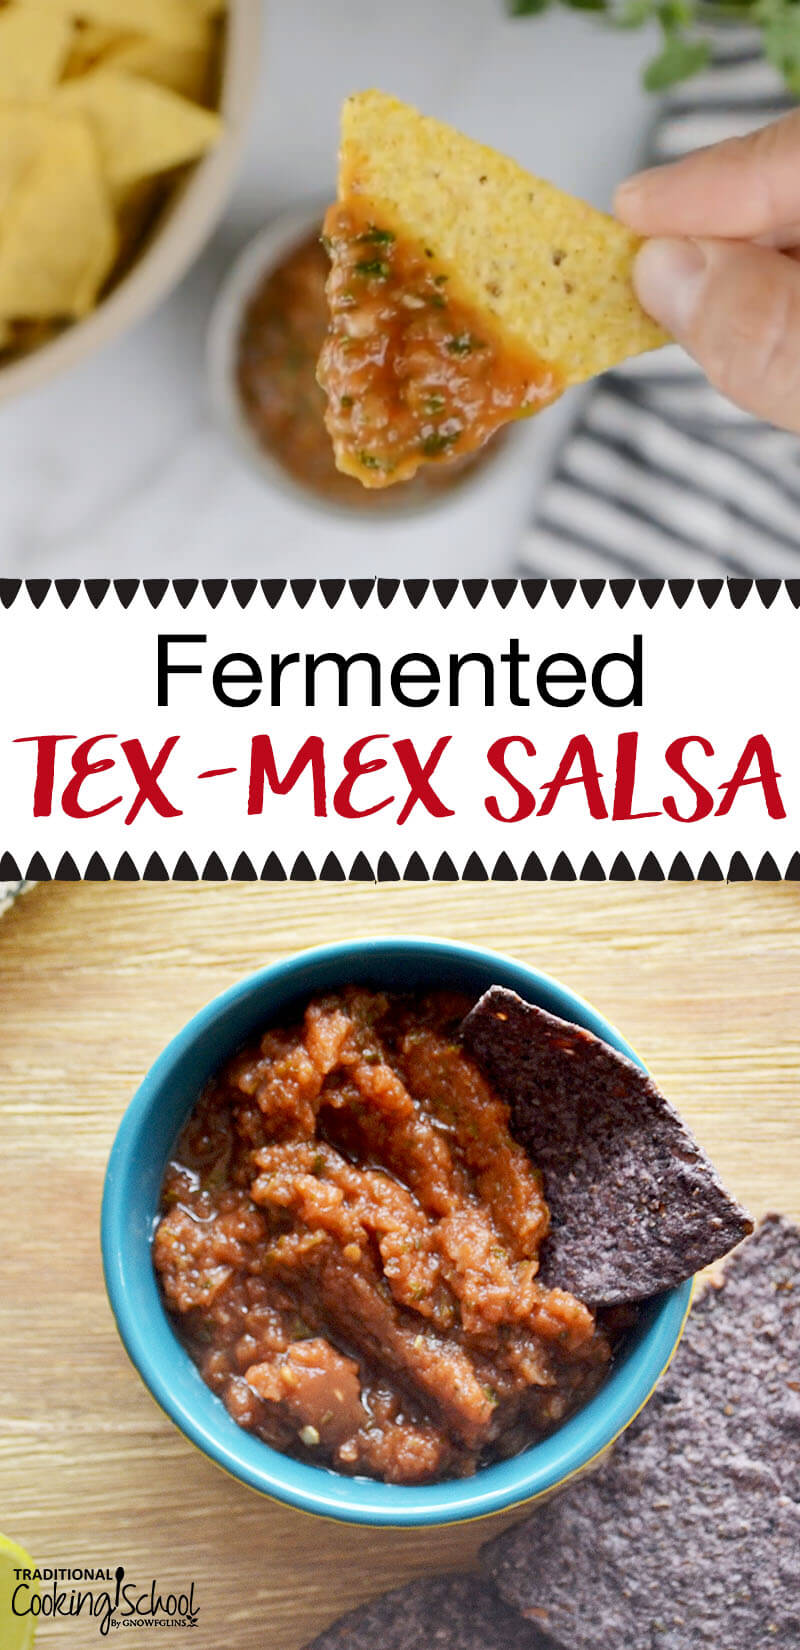 Fermented Tex-Mex Salsa | Having lived in Texas all my life, I think it’s safe to say that I know a thing or two about really good Tex-Mex salsa. I’ve spent the last two decades perfecting my salsa recipe, and several years ago, I began lacto-fermenting it. It’s my most-requested recipe! | TraditionalCookingSchool.com